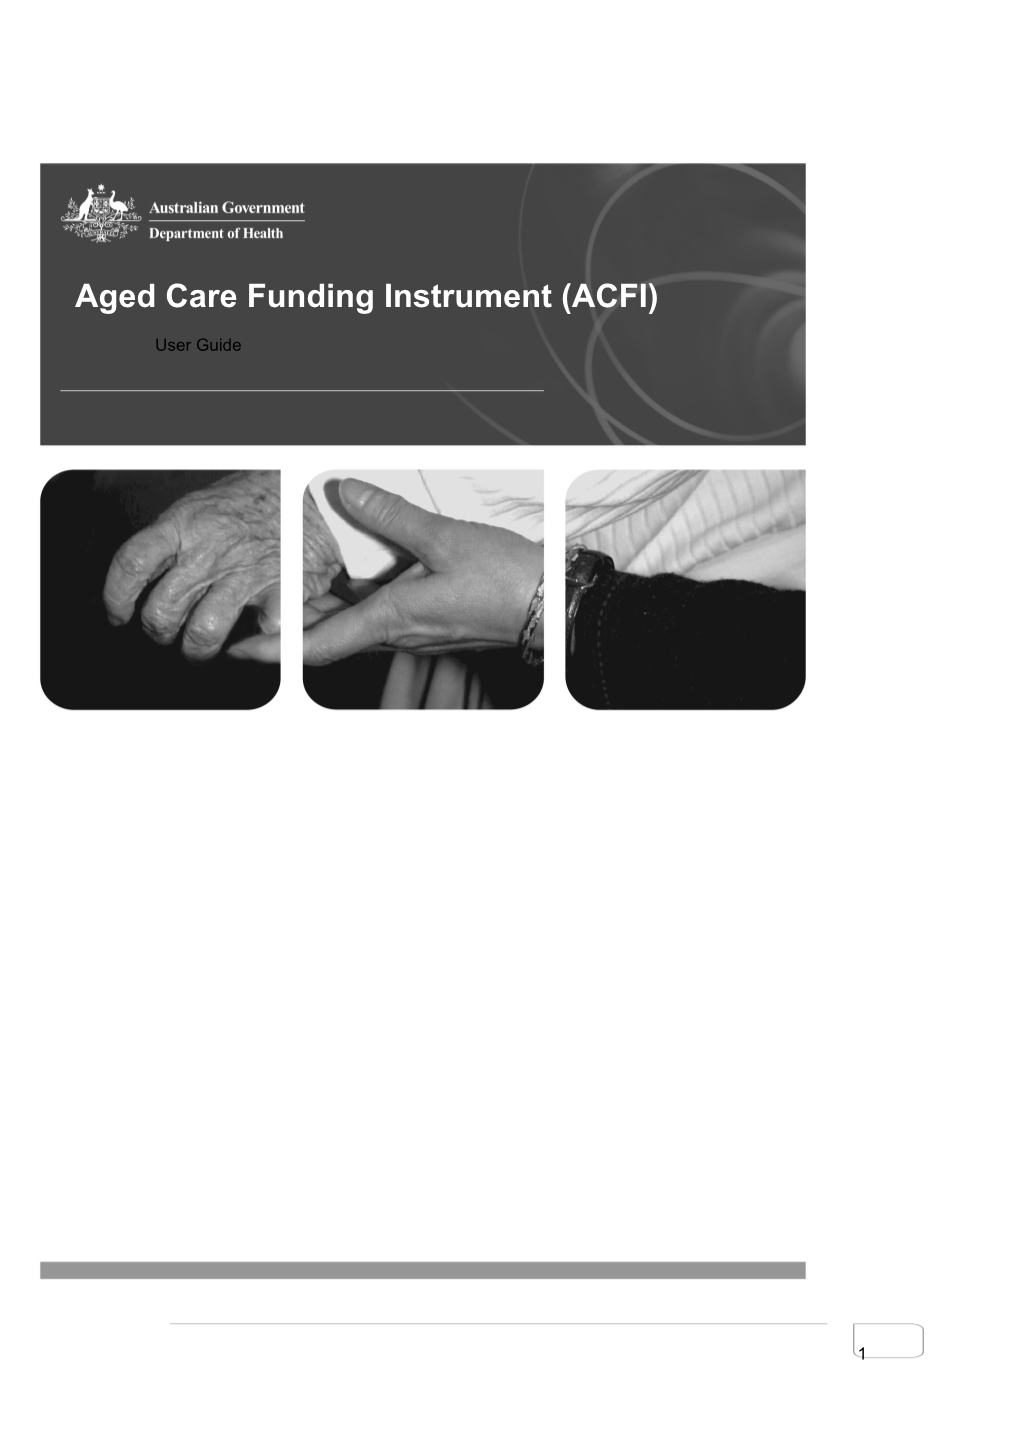 Aged Care Funding Instrument - User Guide